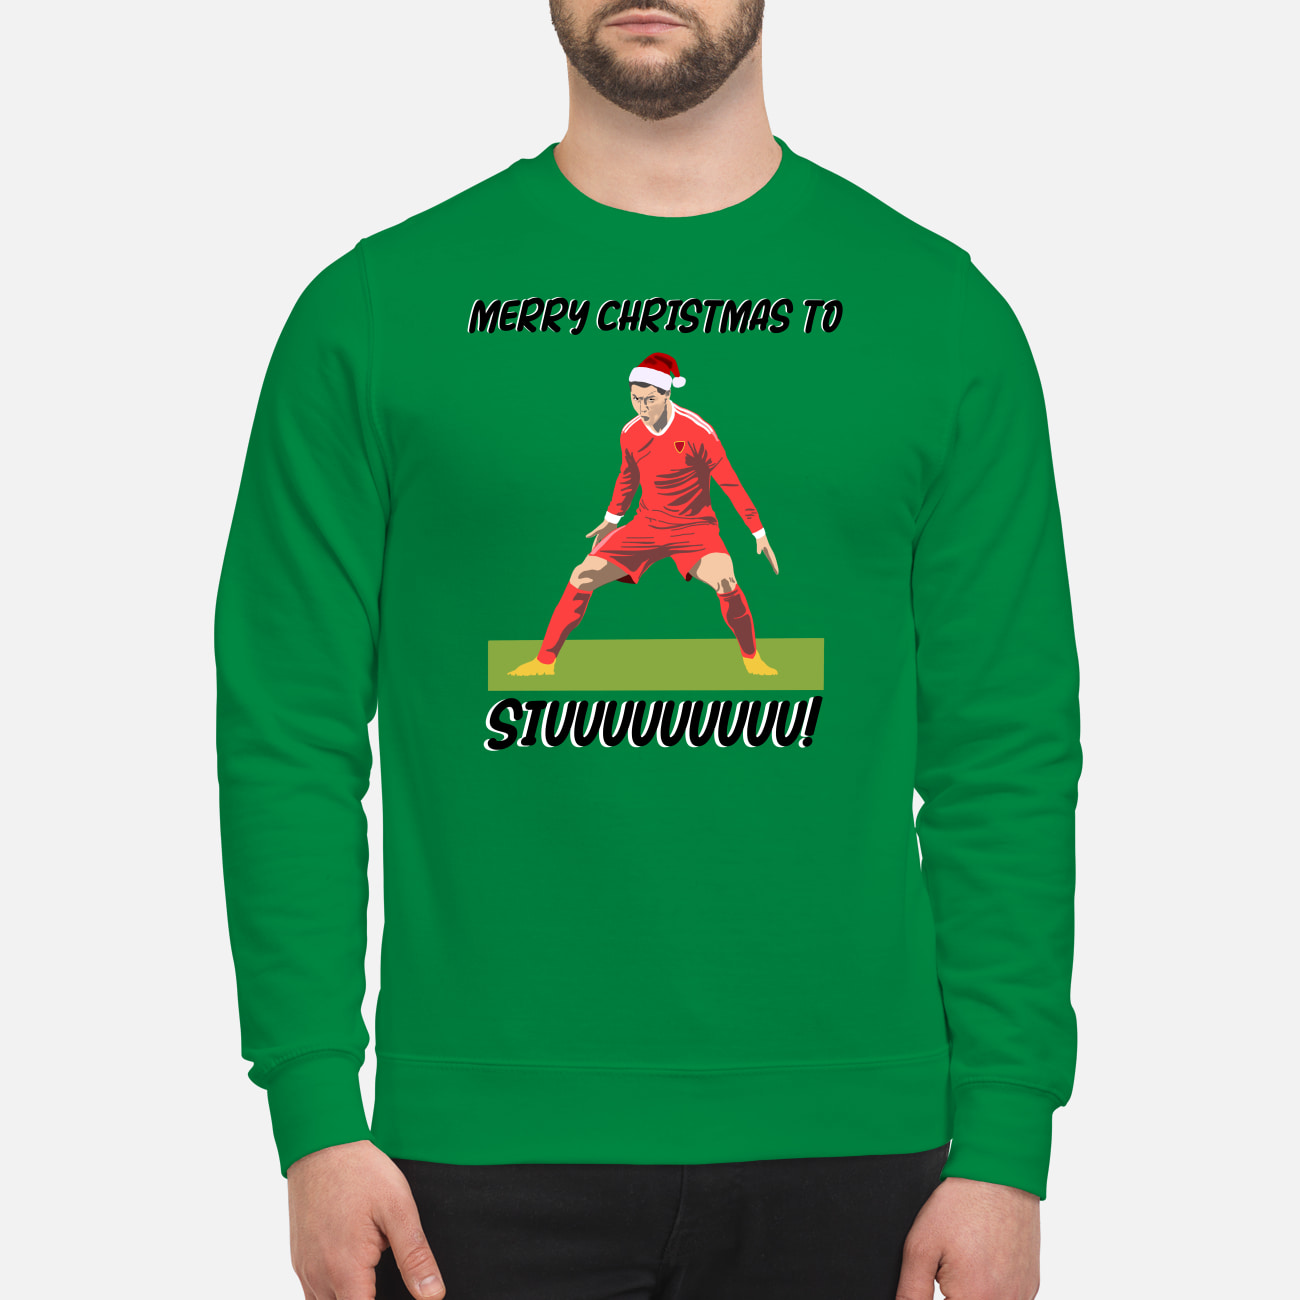 Hilarious range of Christmas jumpers that are perfect for Mancs has launched, The Manc